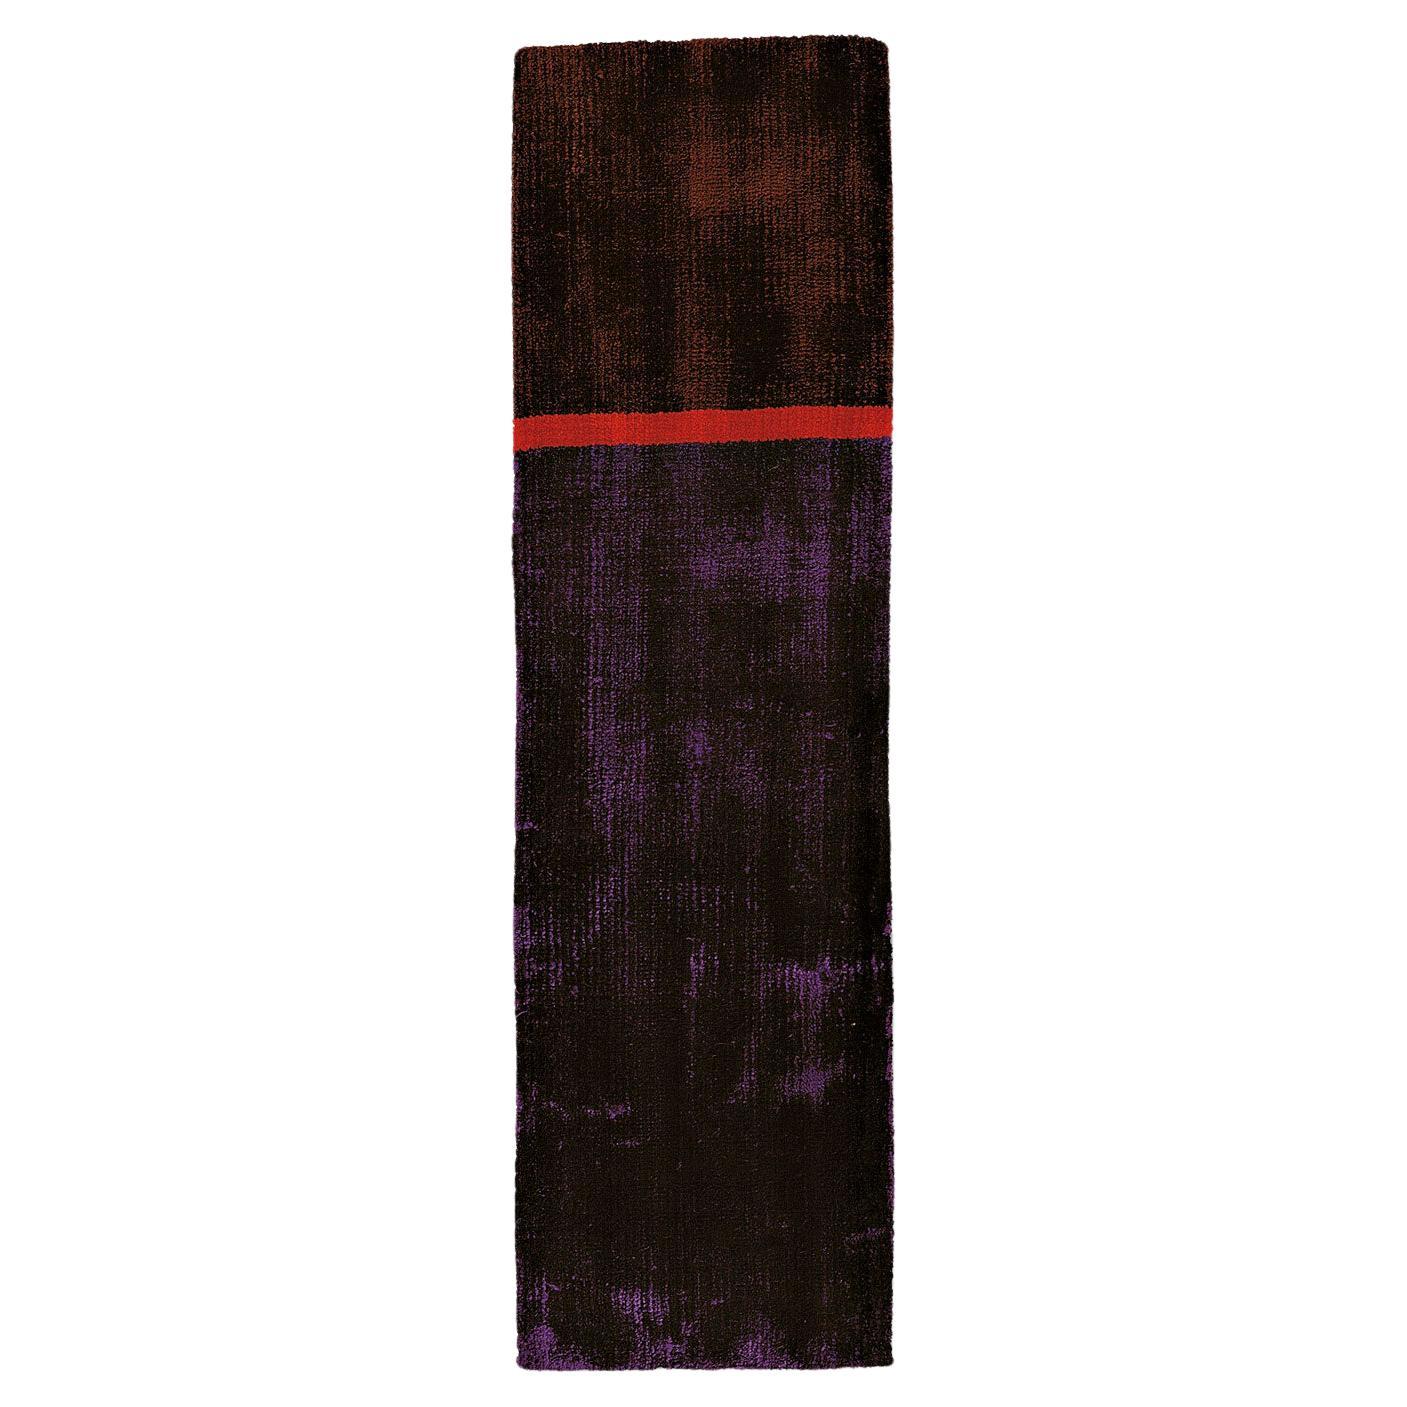 21st Cent Shiny Violet Brown Runner Rug by Deanna Comellini In Stock 60x200cm For Sale